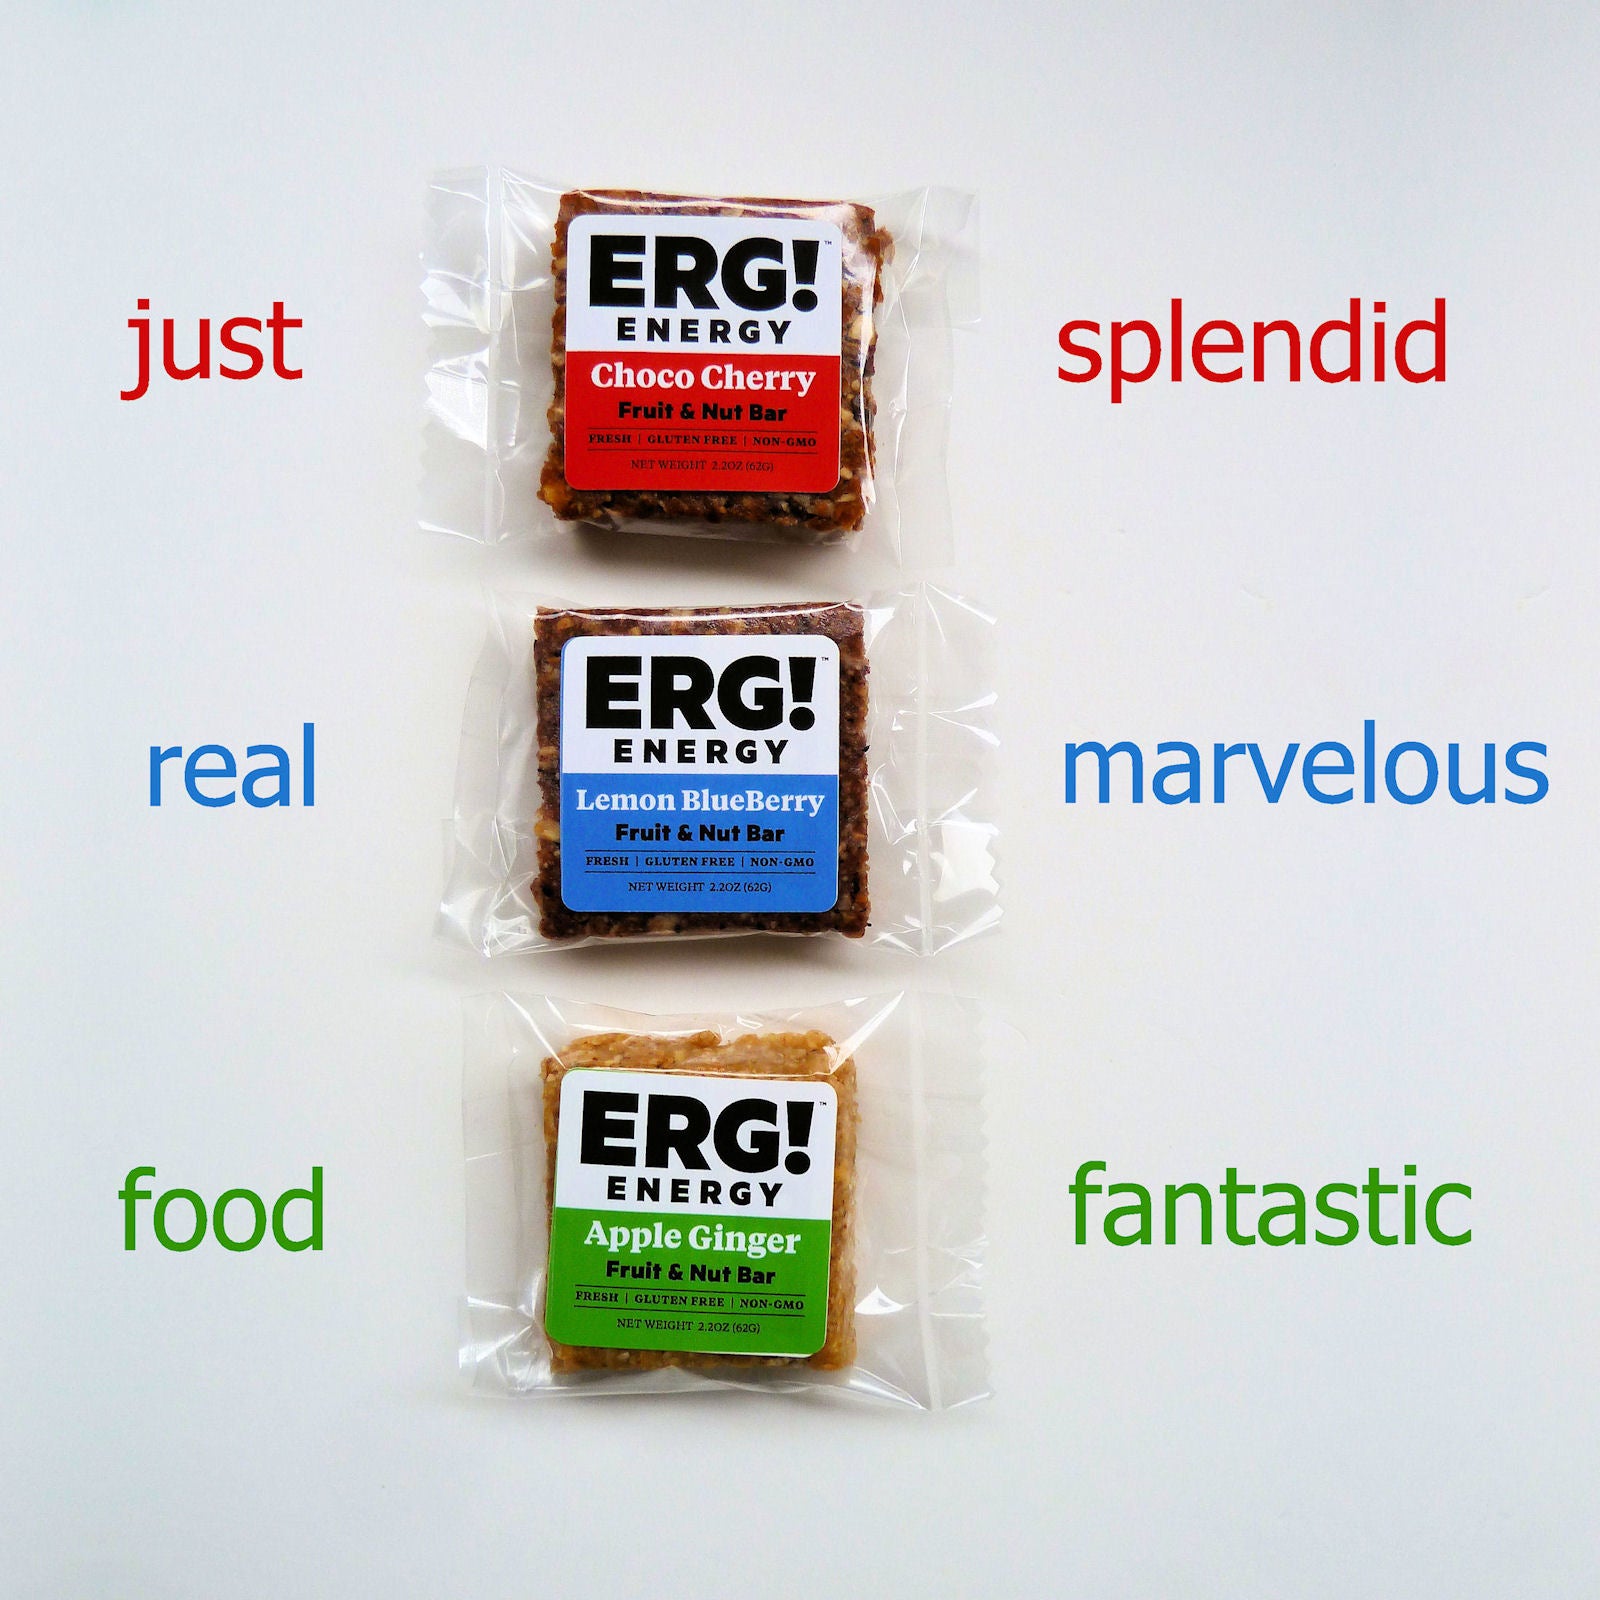 Subscription - 18 ERG! Bars Each Month for 3 Months